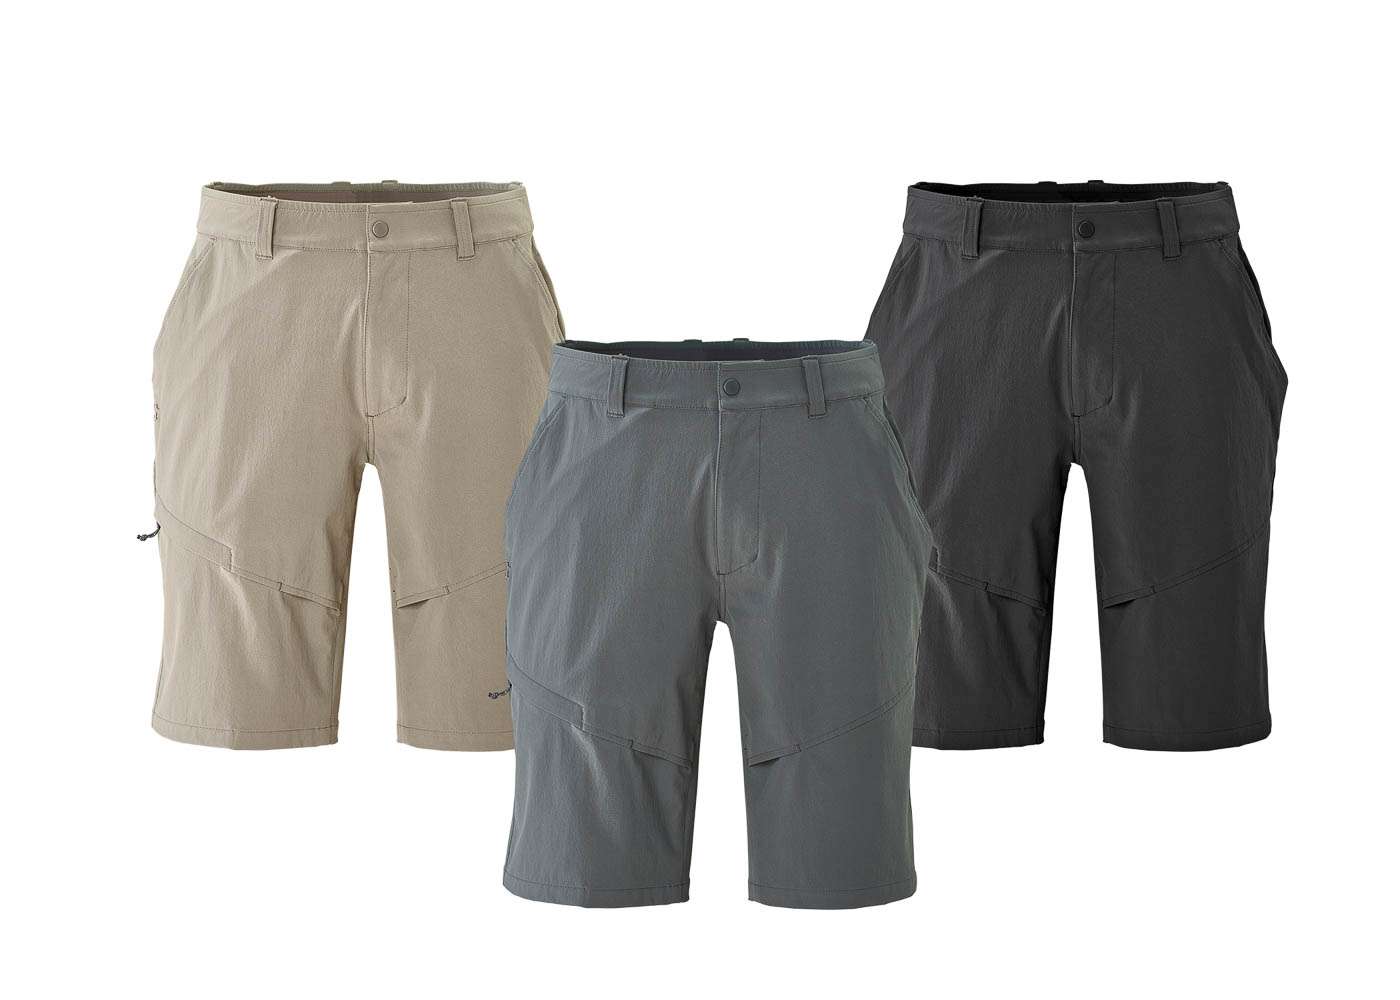 <p><strong>Striker CoolWave Tournament Short</strong></p><p>Rugged, comfortable, and built for everyday wear, the Striker Tournament Short has all the features anglers need on and off the water. Six total storage pockets keep smaller items secure and easily accessible. Strategically placed vented seams allow for more airflow. The full-length elastic waistband forms to the waist and stretches with range of motion. Available sizes S-4XL and three color options. $69.99. <a href=